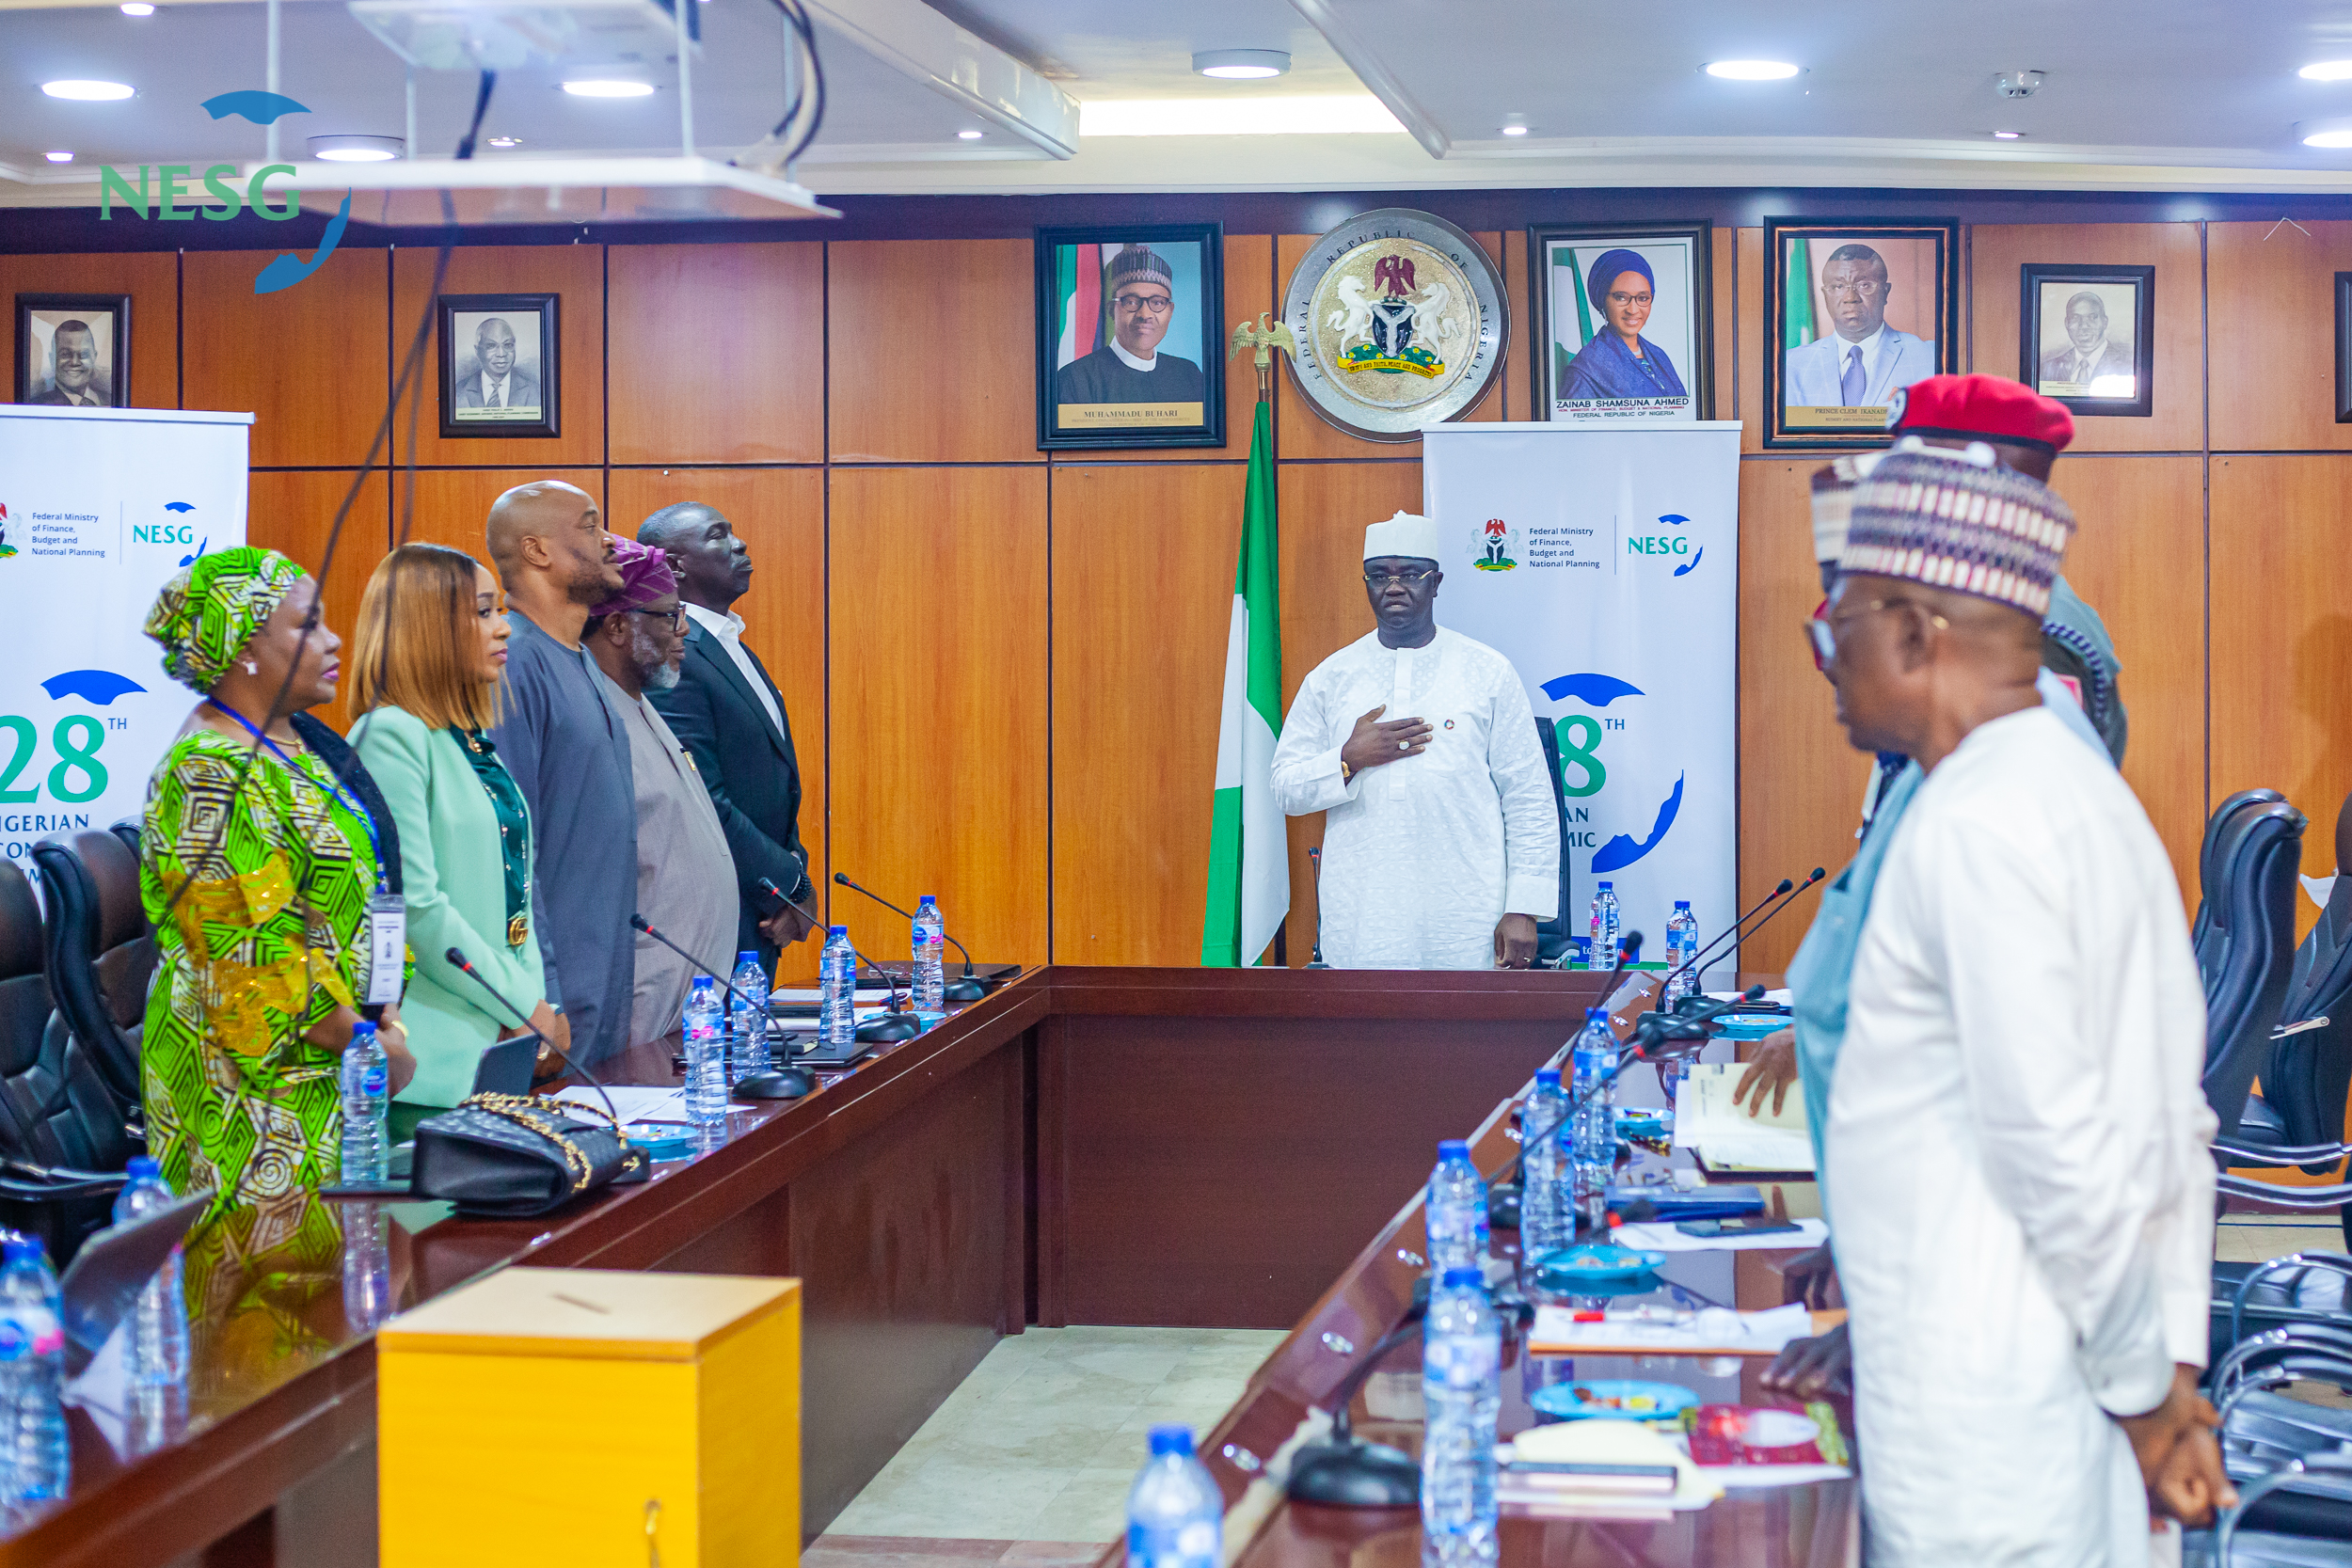 2023 and Beyond: Priorities for Shared Prosperity,  The Nigerian Economic Summit Group